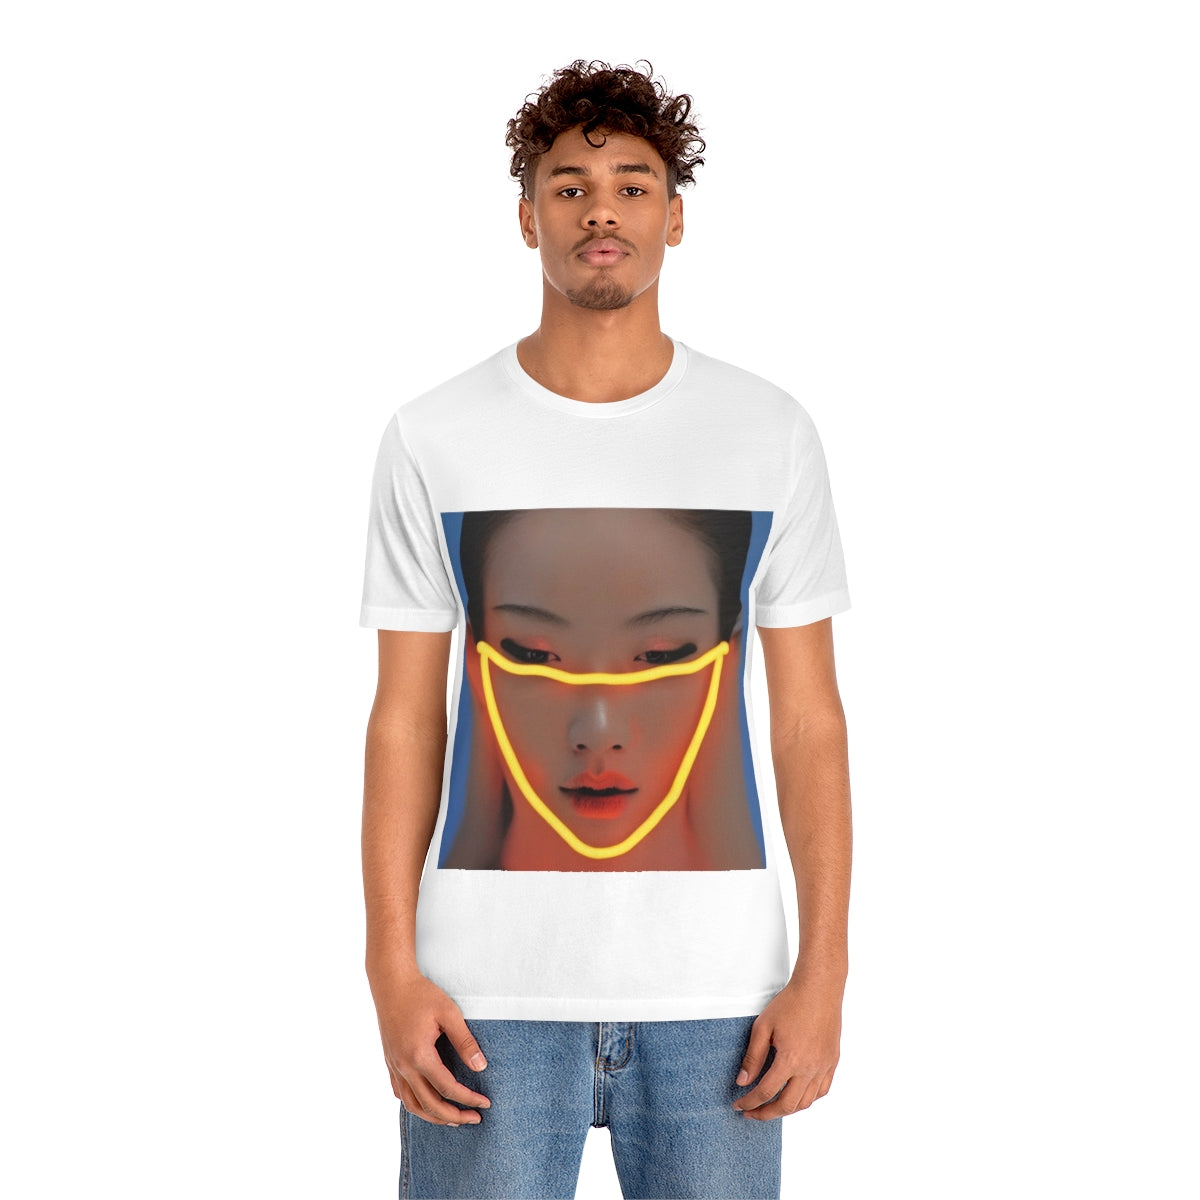 Innocently Happy_Mask Our Emotions T-Shirt Collection - DSIV